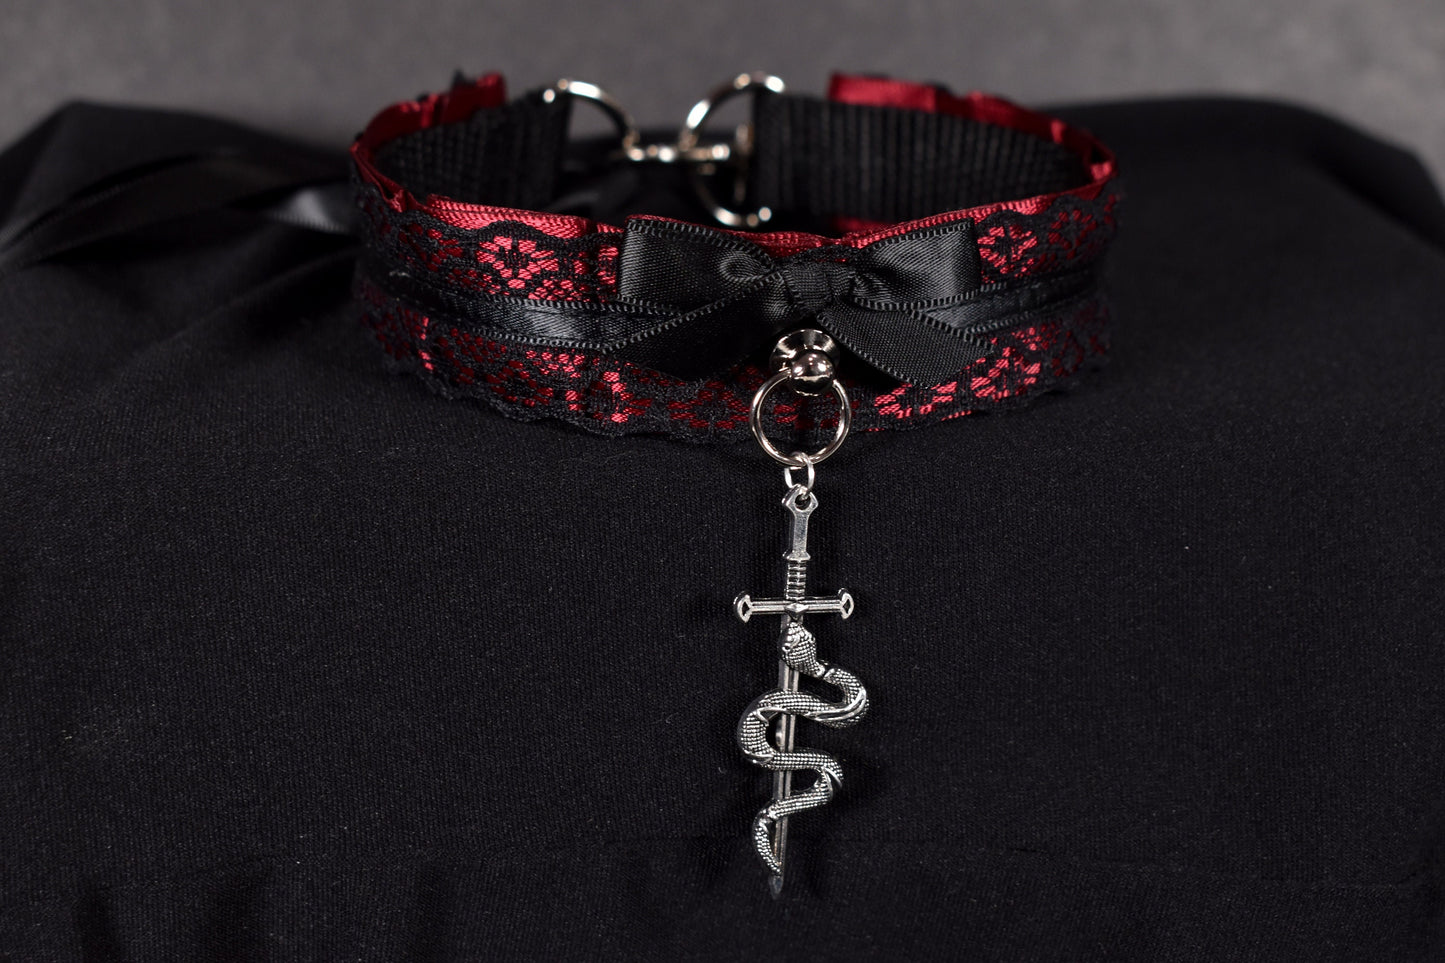 Made to your size / Snake sword choker / kitten play collar / goth / alt fashion / emo  / pet play necklace / fancy bdsm /